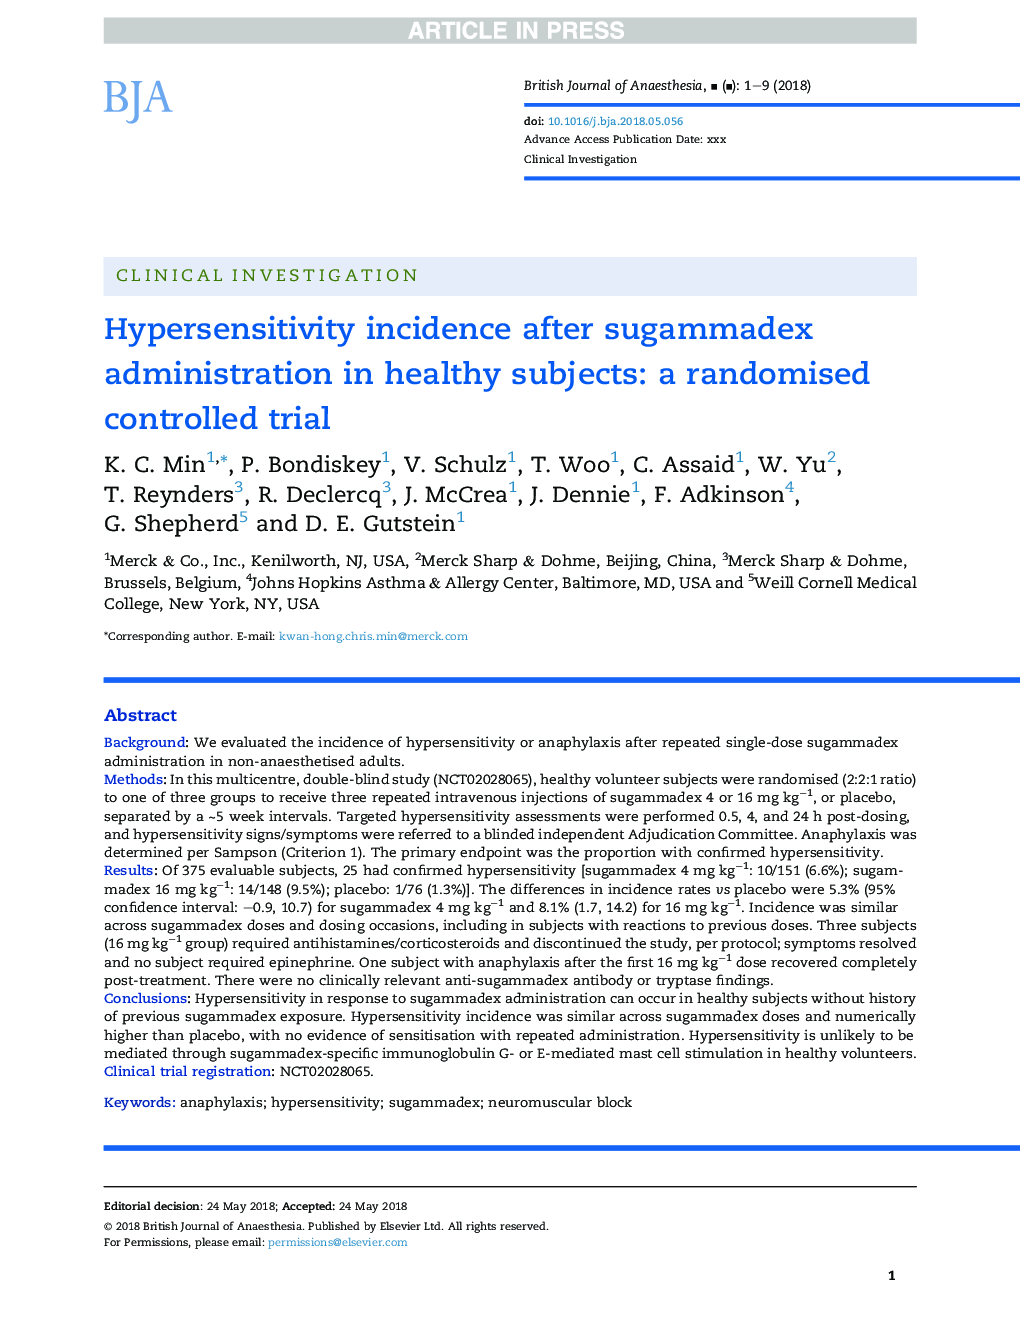 Hypersensitivity incidence after sugammadex administration in healthy subjects: aÂ randomised controlled trial